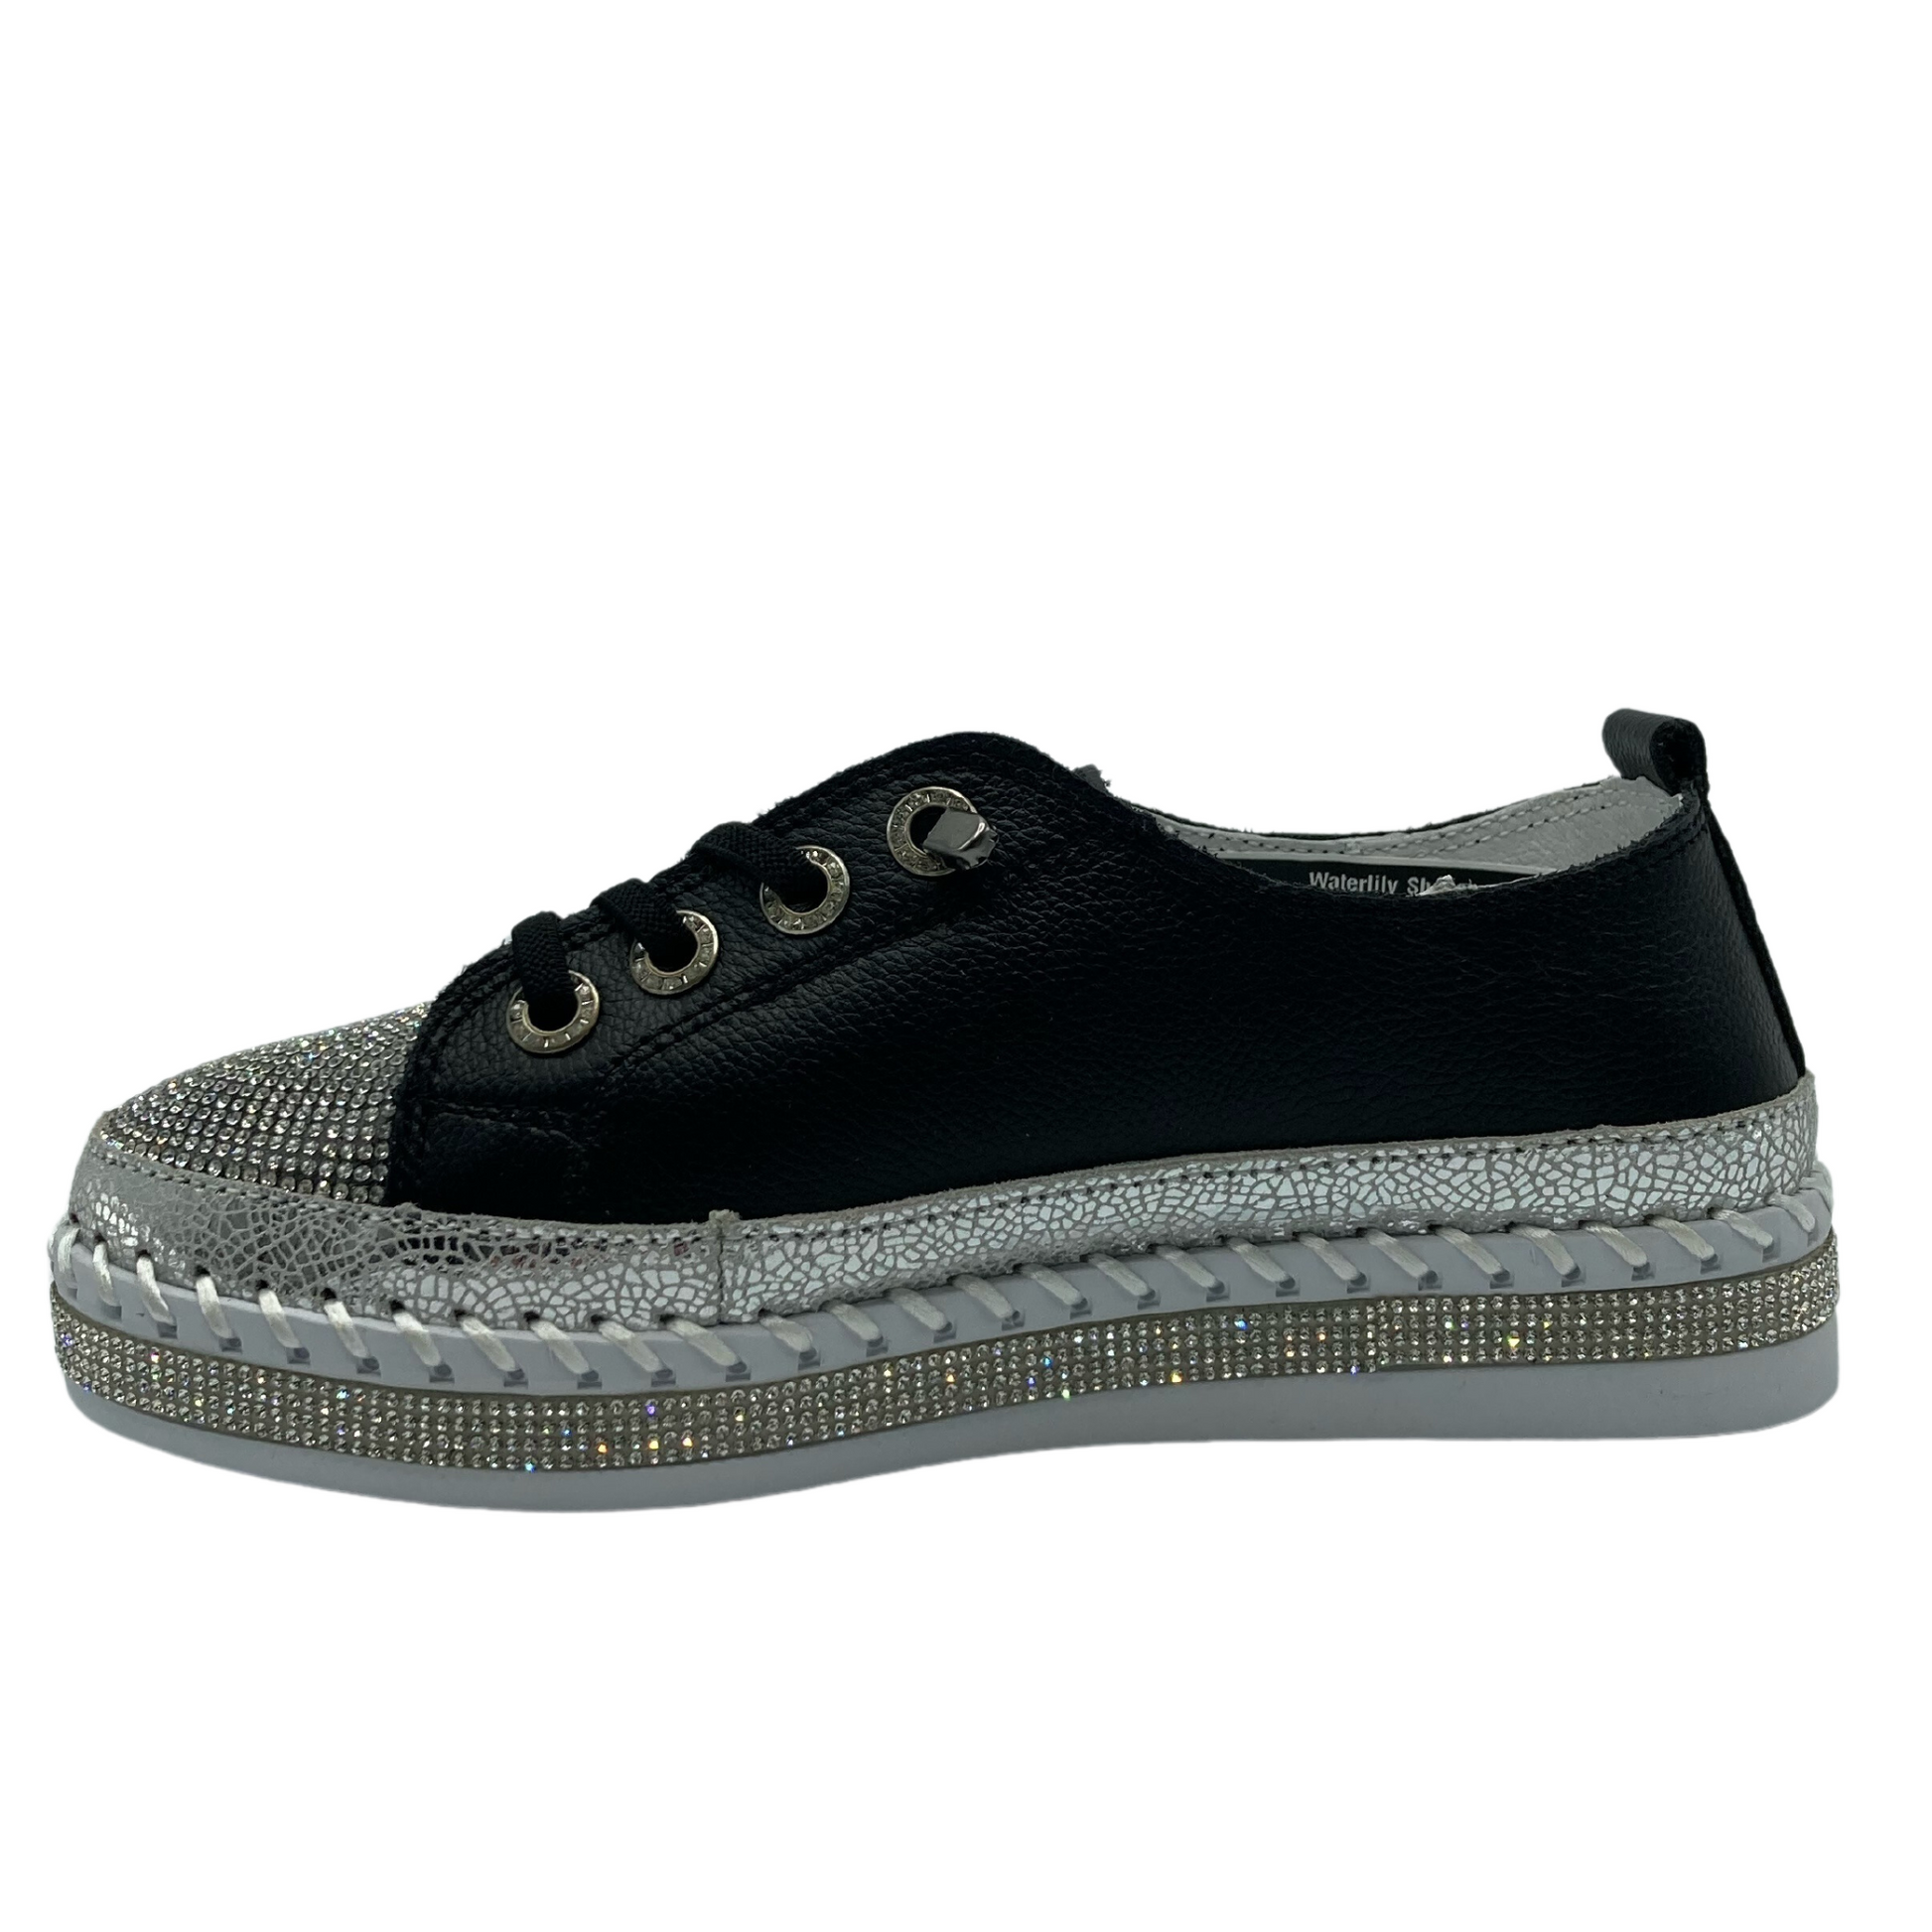 Left facing view of bejewelled platform sneaker with black leather upper